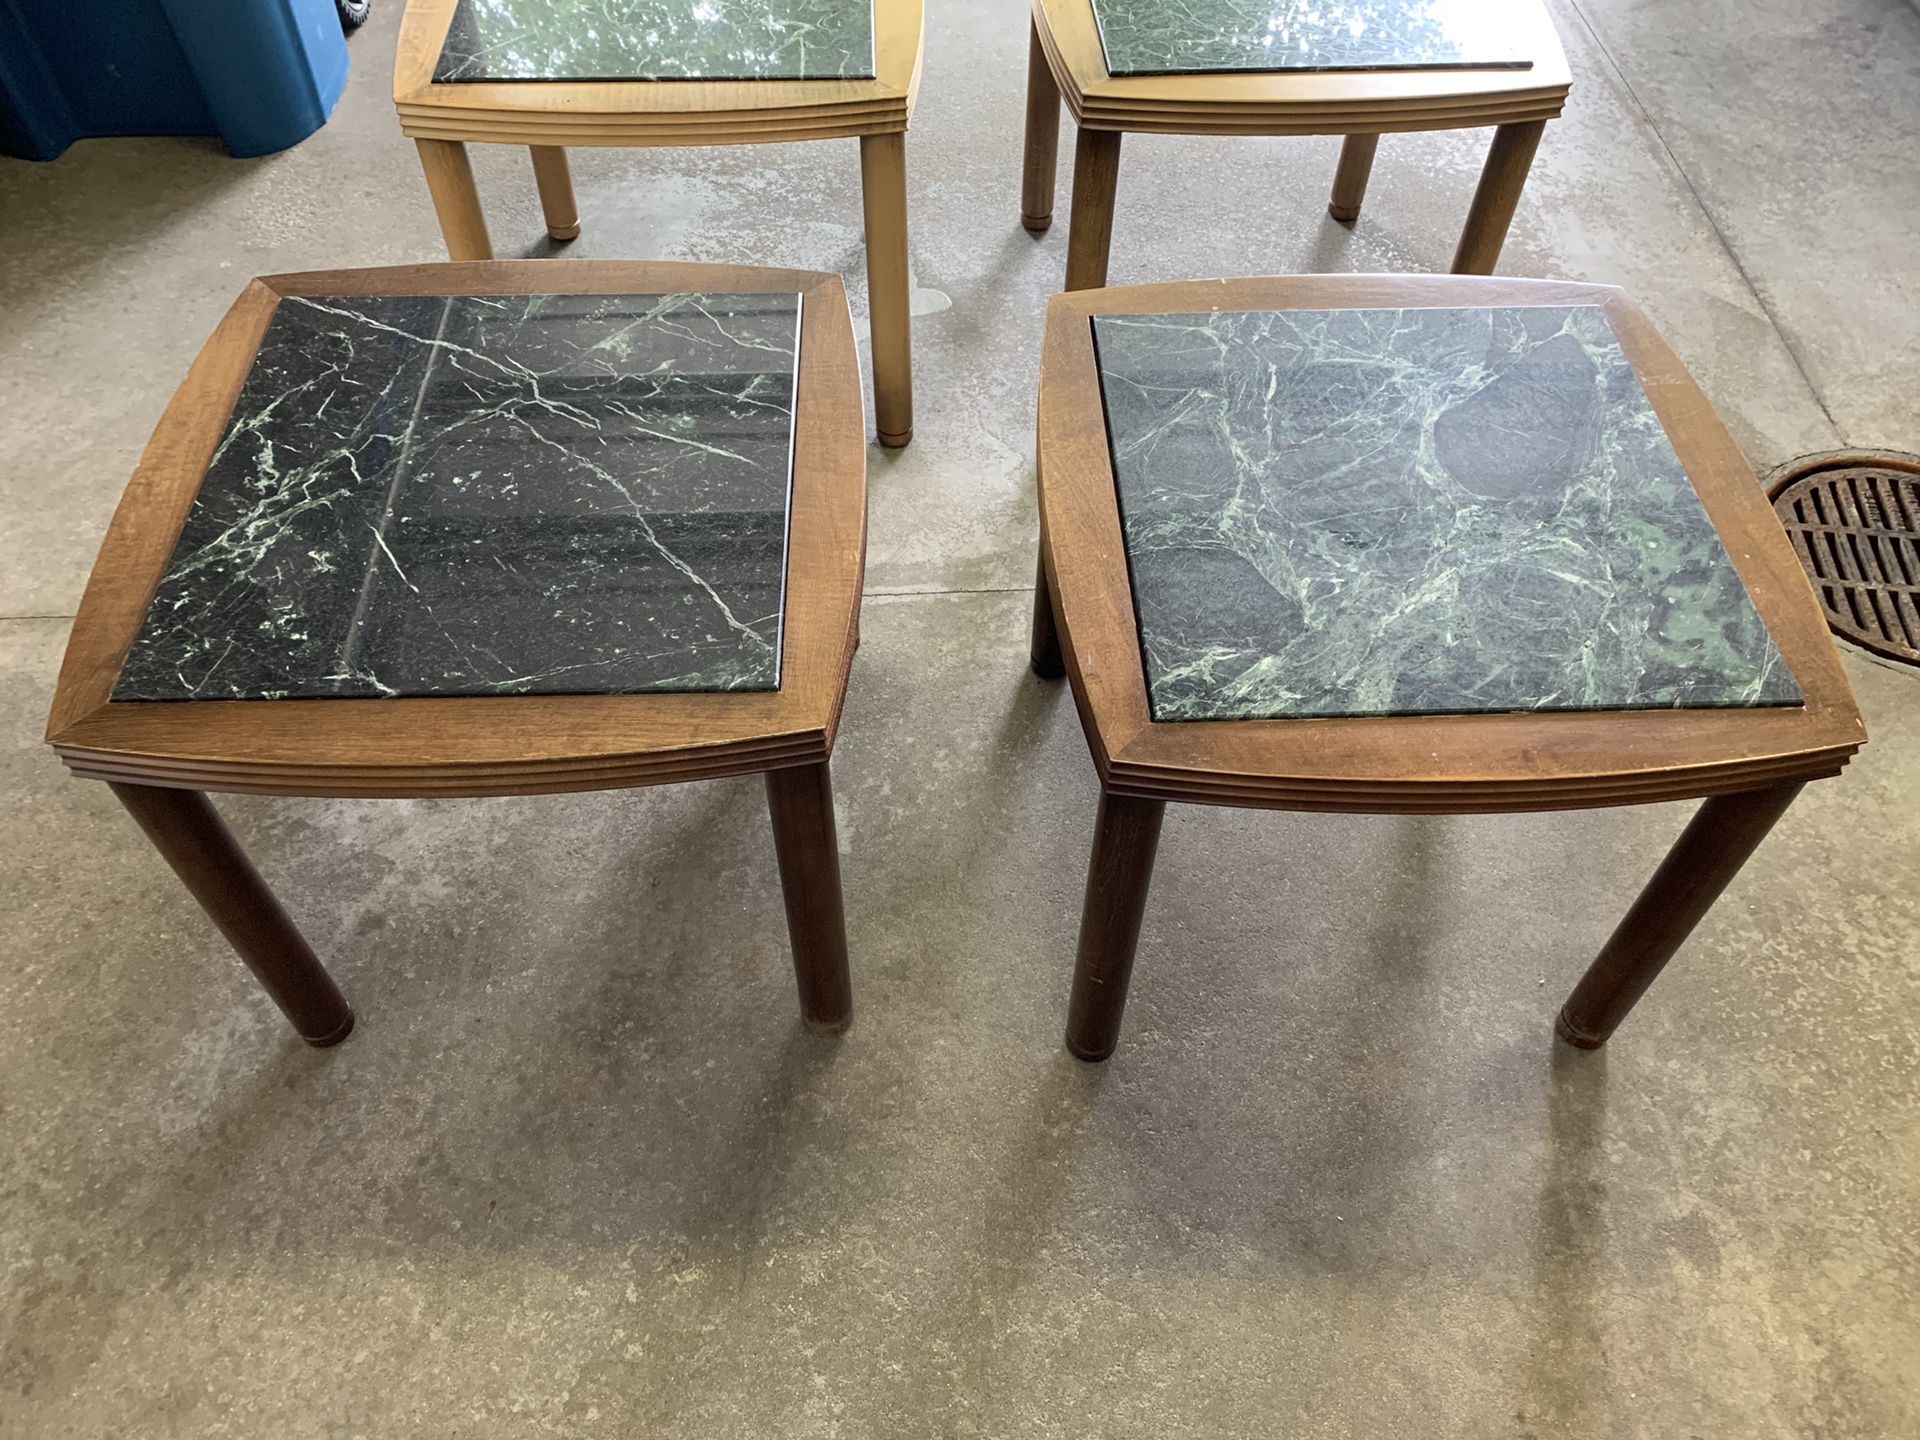 Four End Tables - Granite/Marble Top